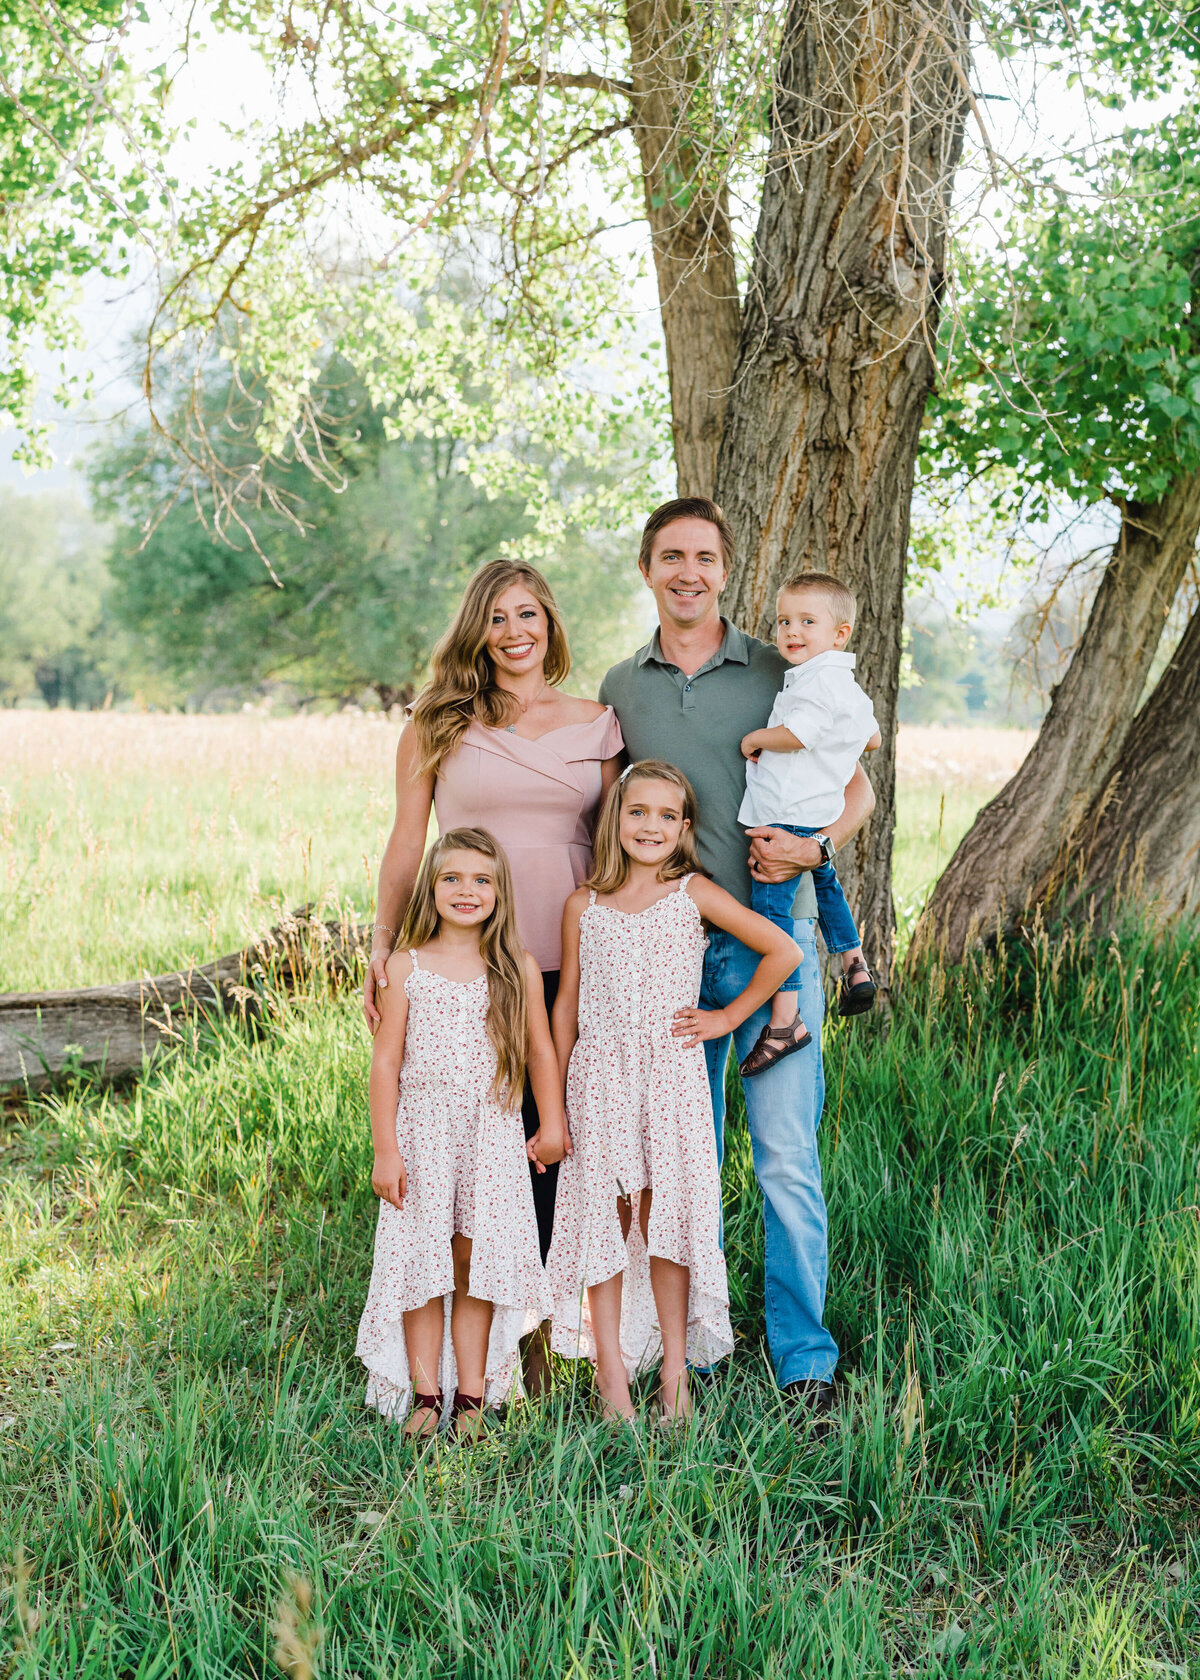 A family of 5 take a formal picture during their session with Northern Virginia Family Photographer